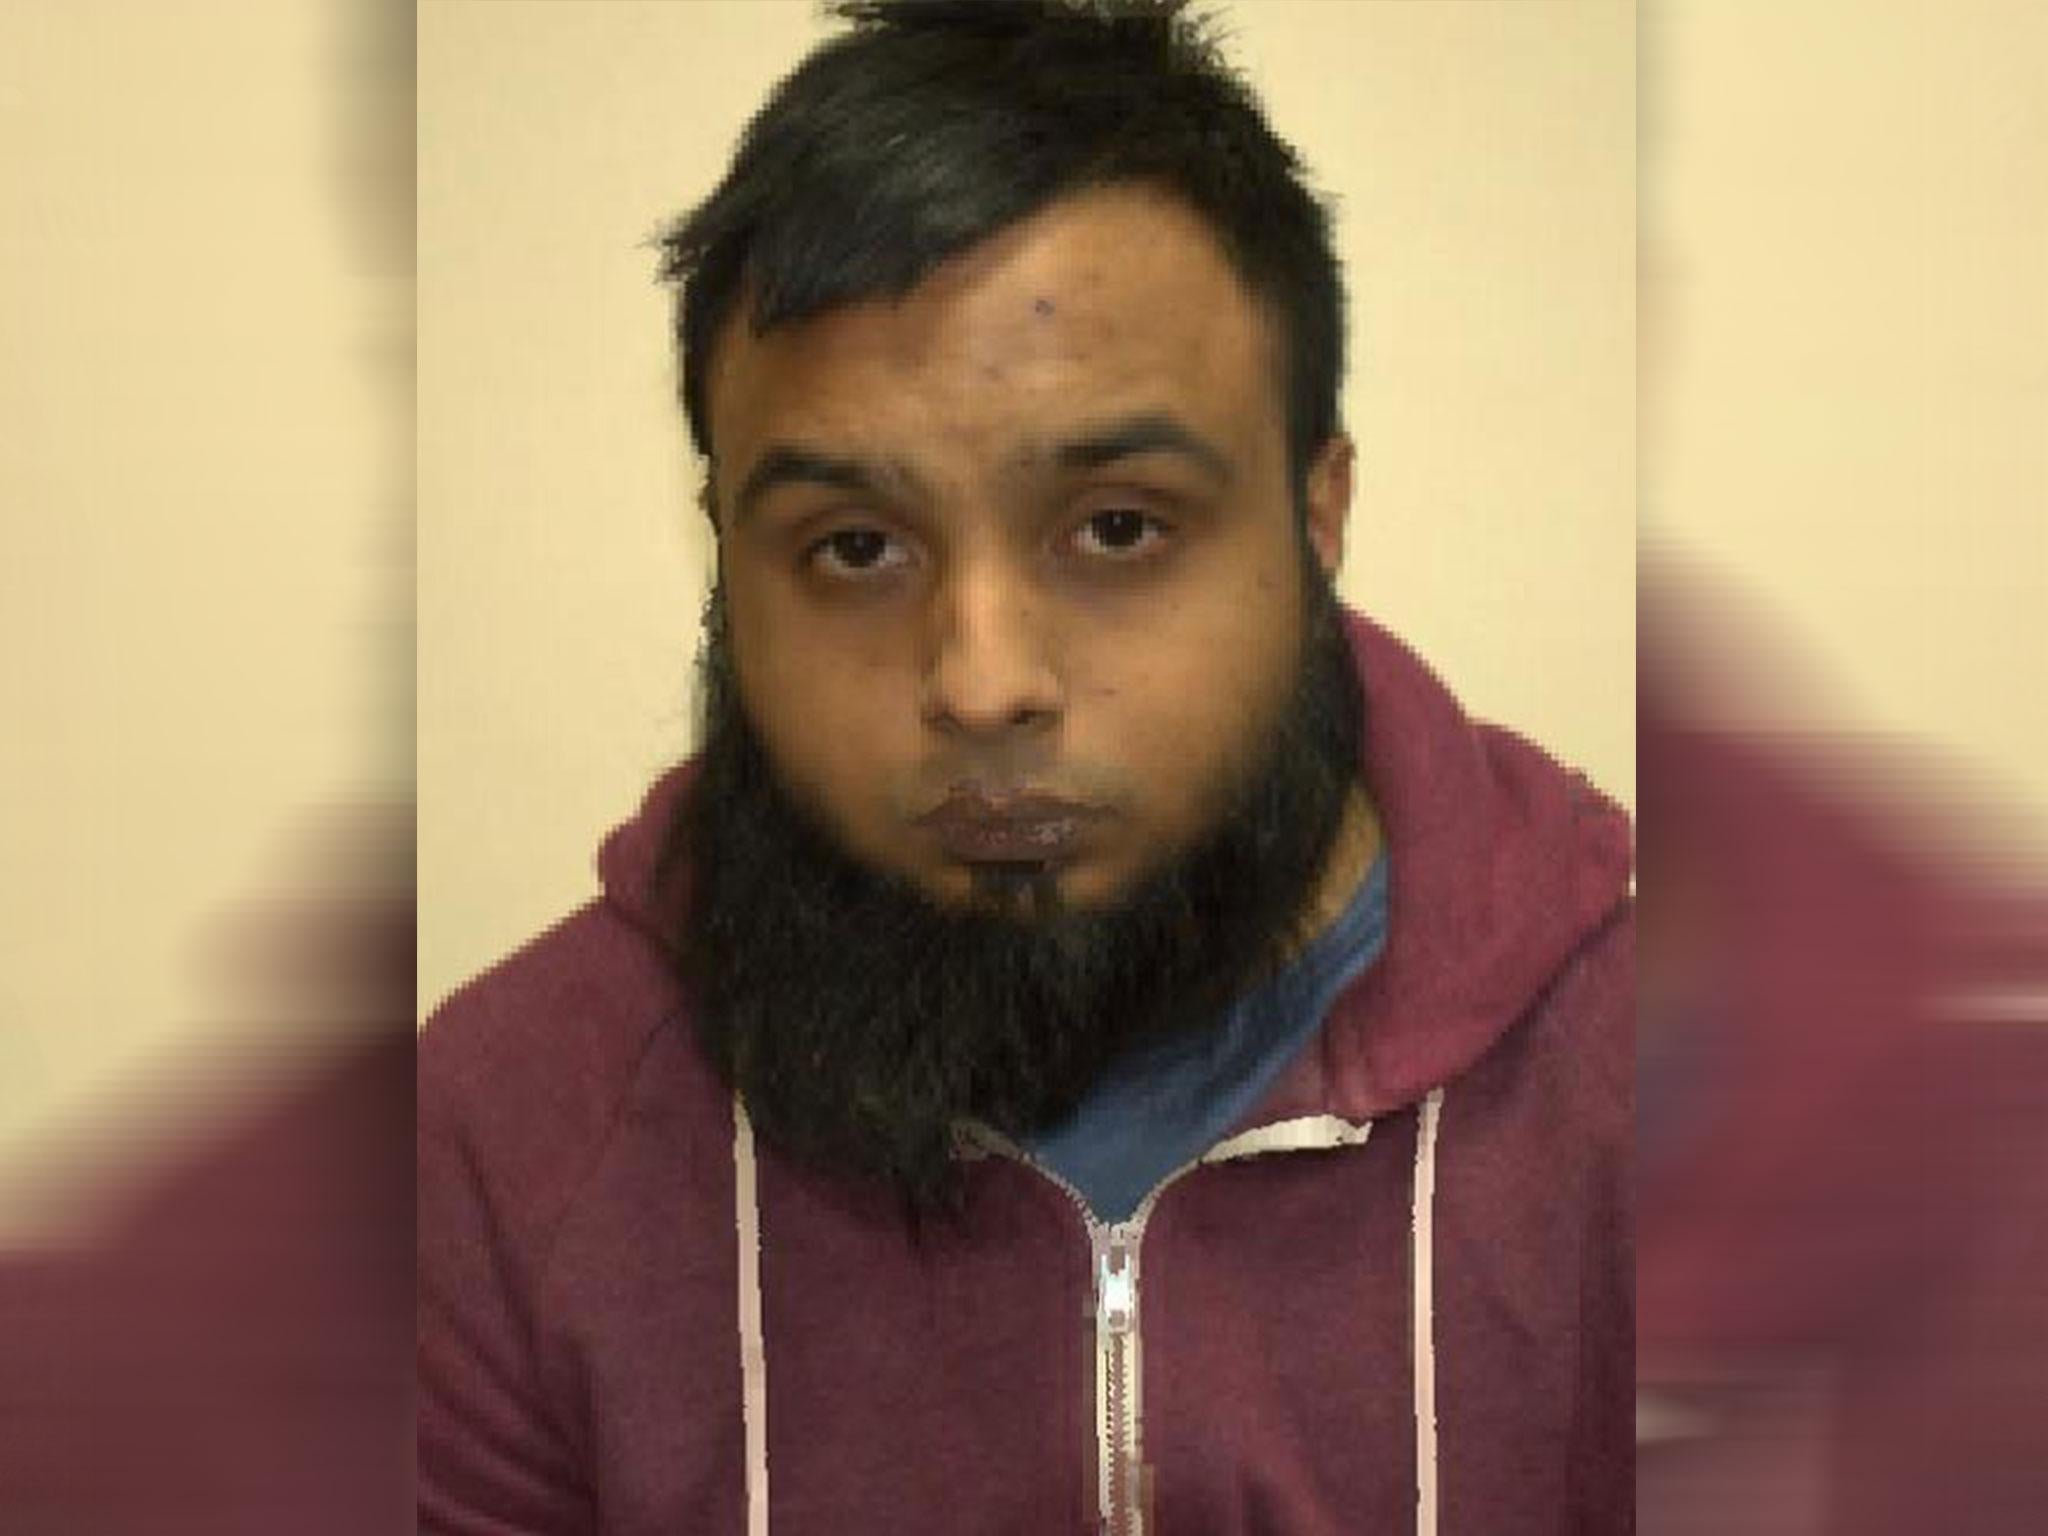 Shohidul Islam pleaded guilty to multiple terrorism offences at the Old Bailey